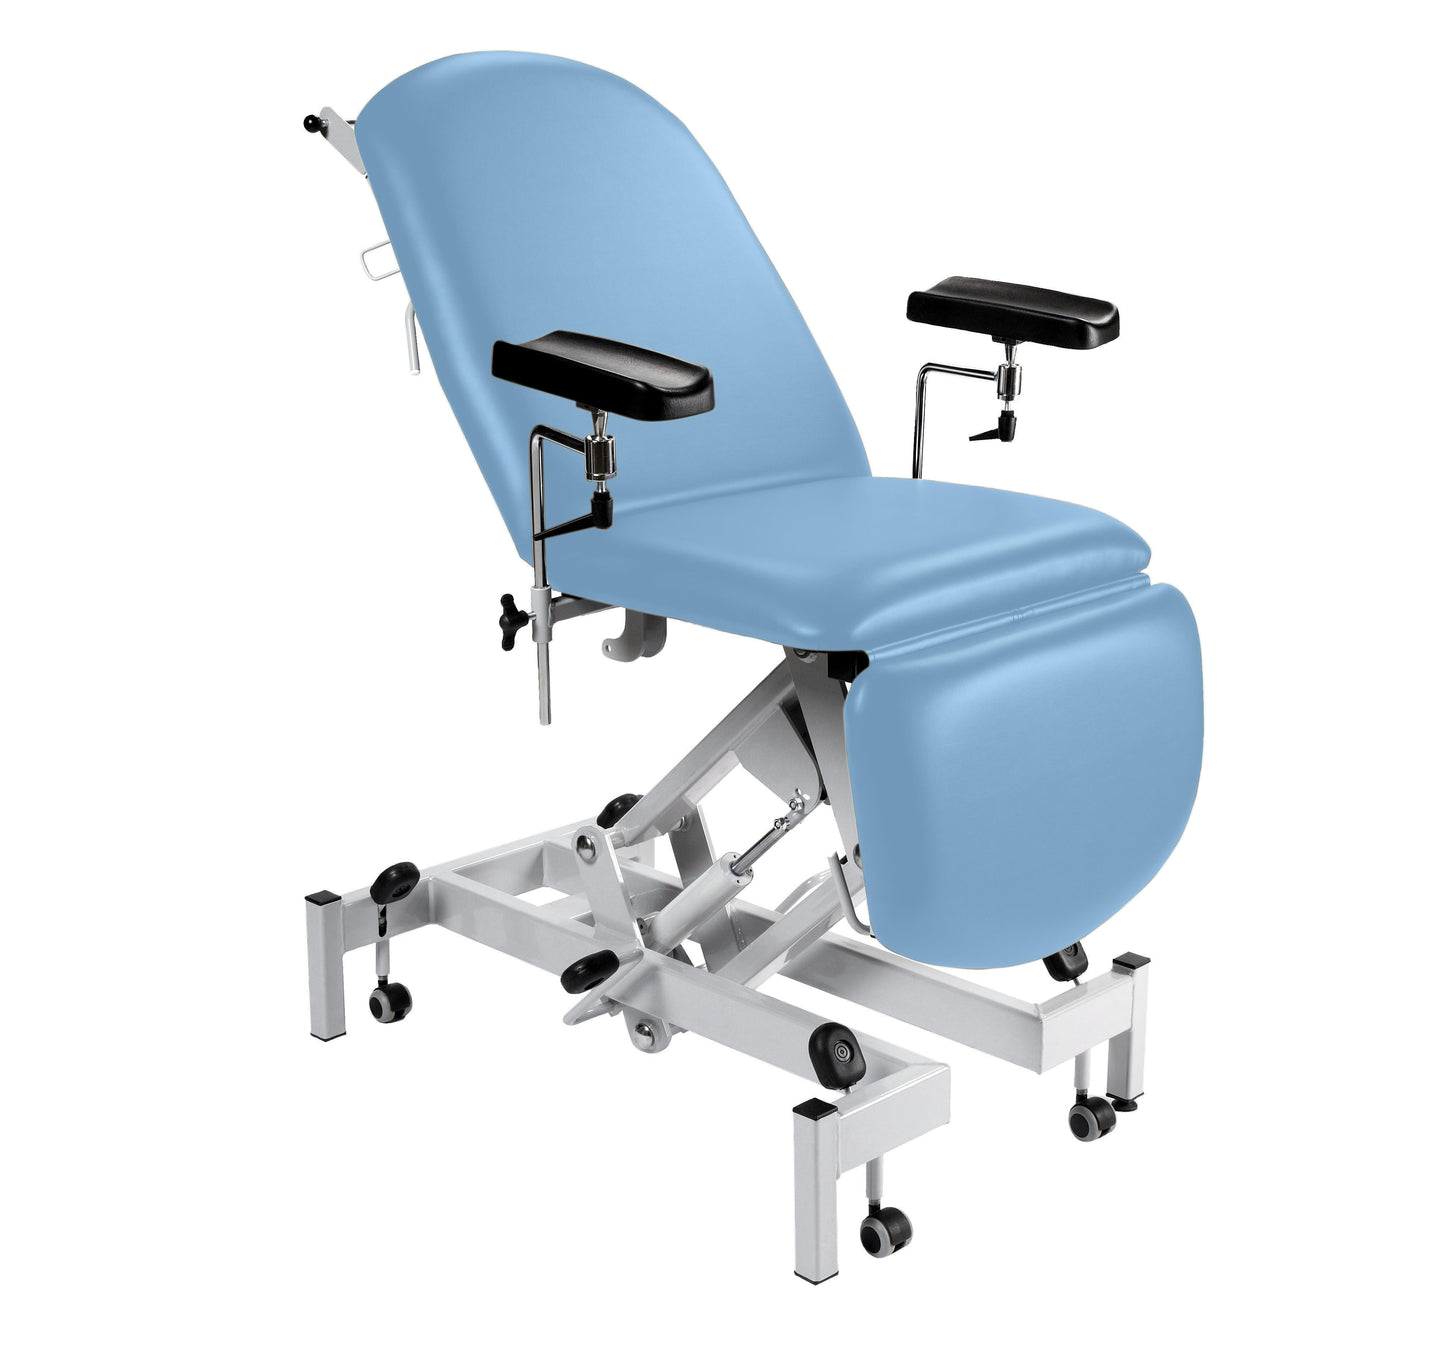 Sunflower - Fusion Phlebotomy Chair with Hydraulic Height Adjustment